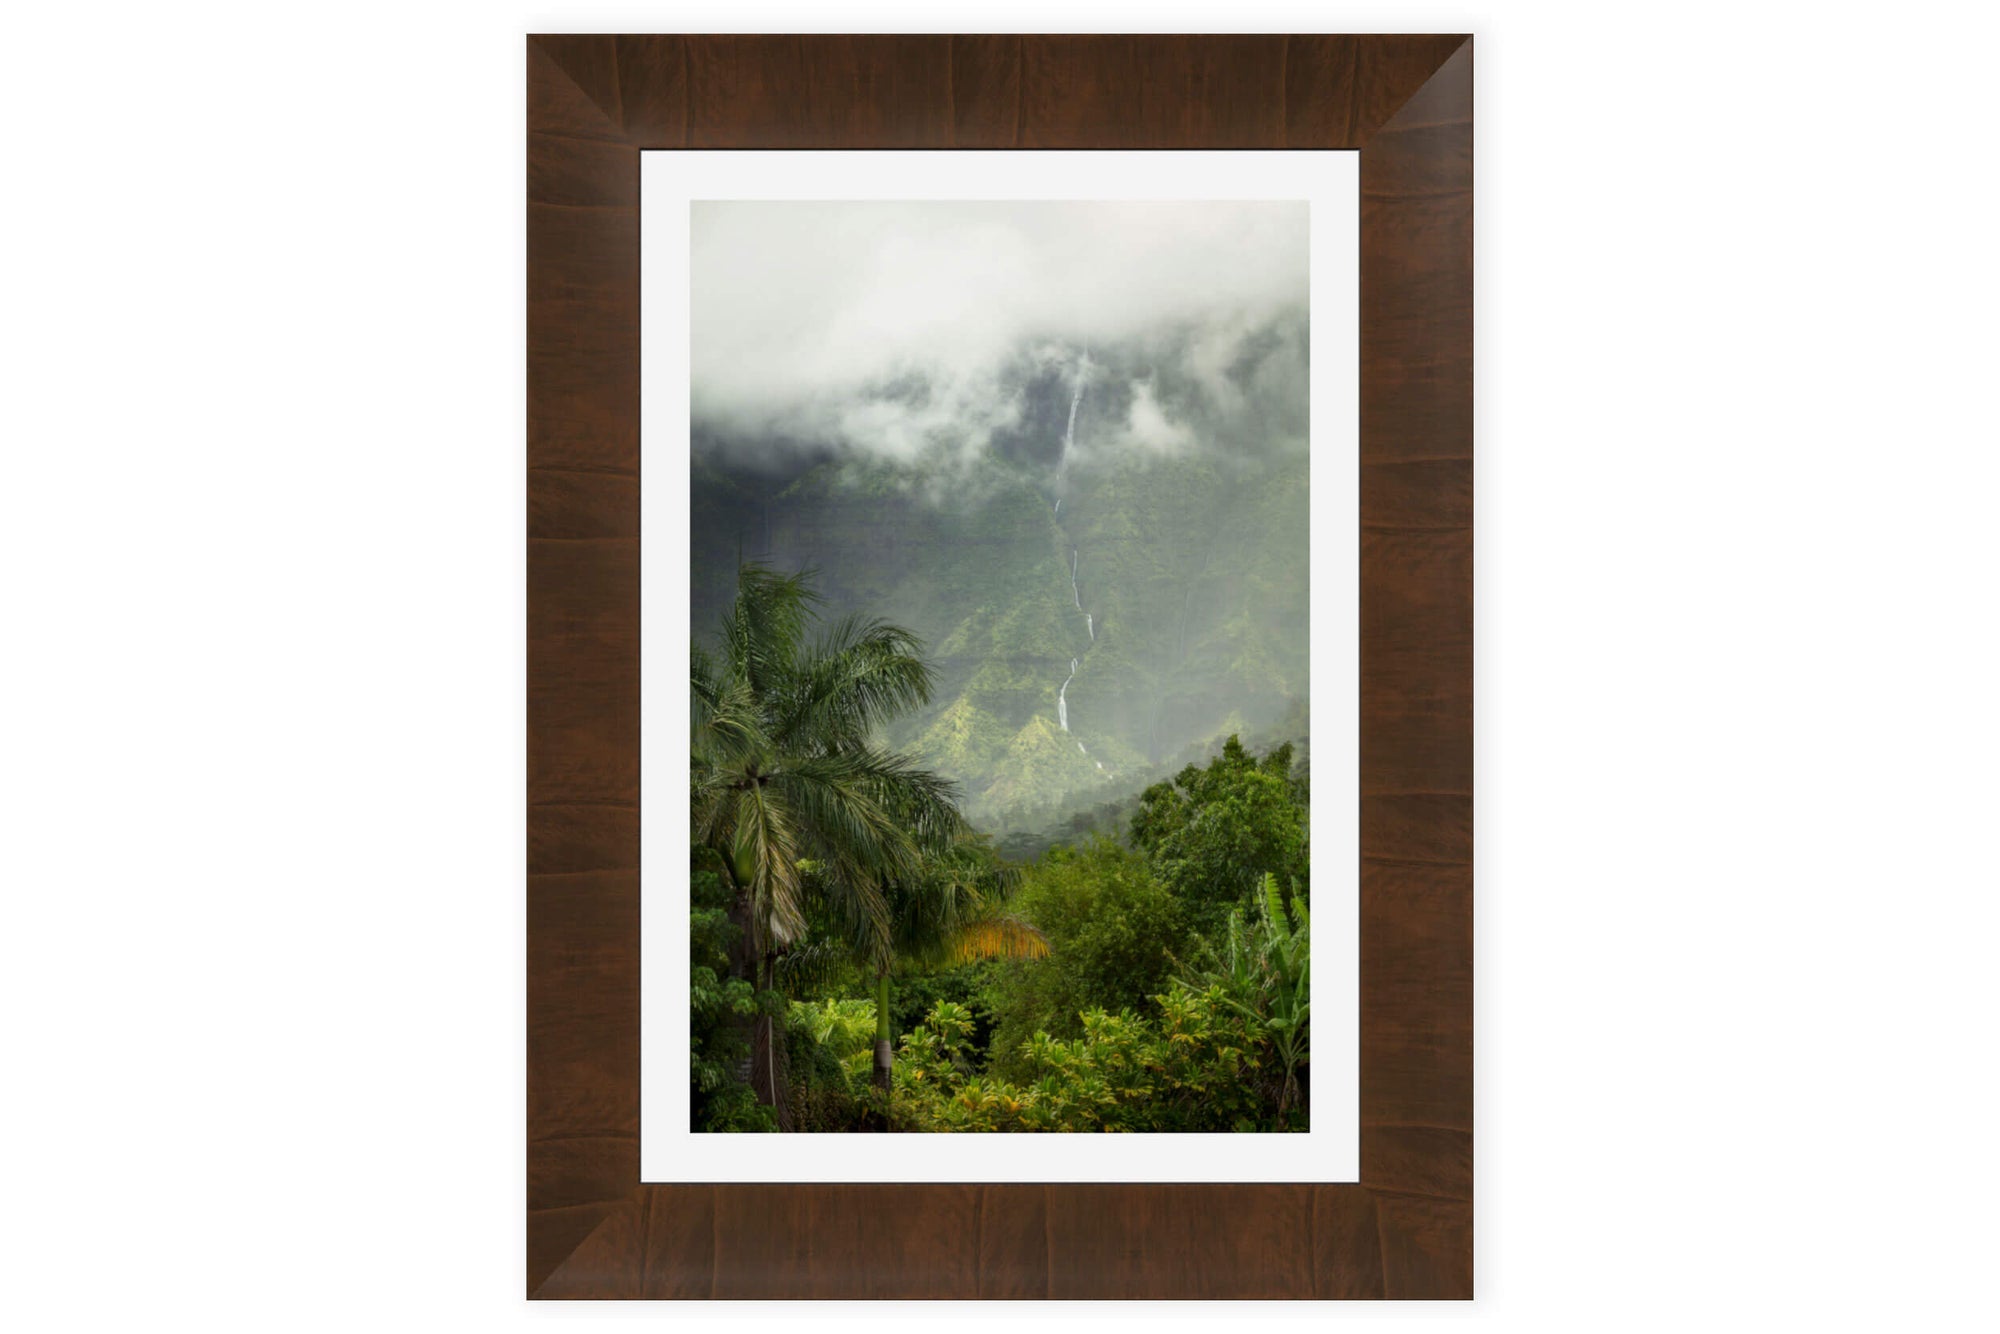 A piece of framed Kauai art shows a waterfall picture outside of Hanalei.